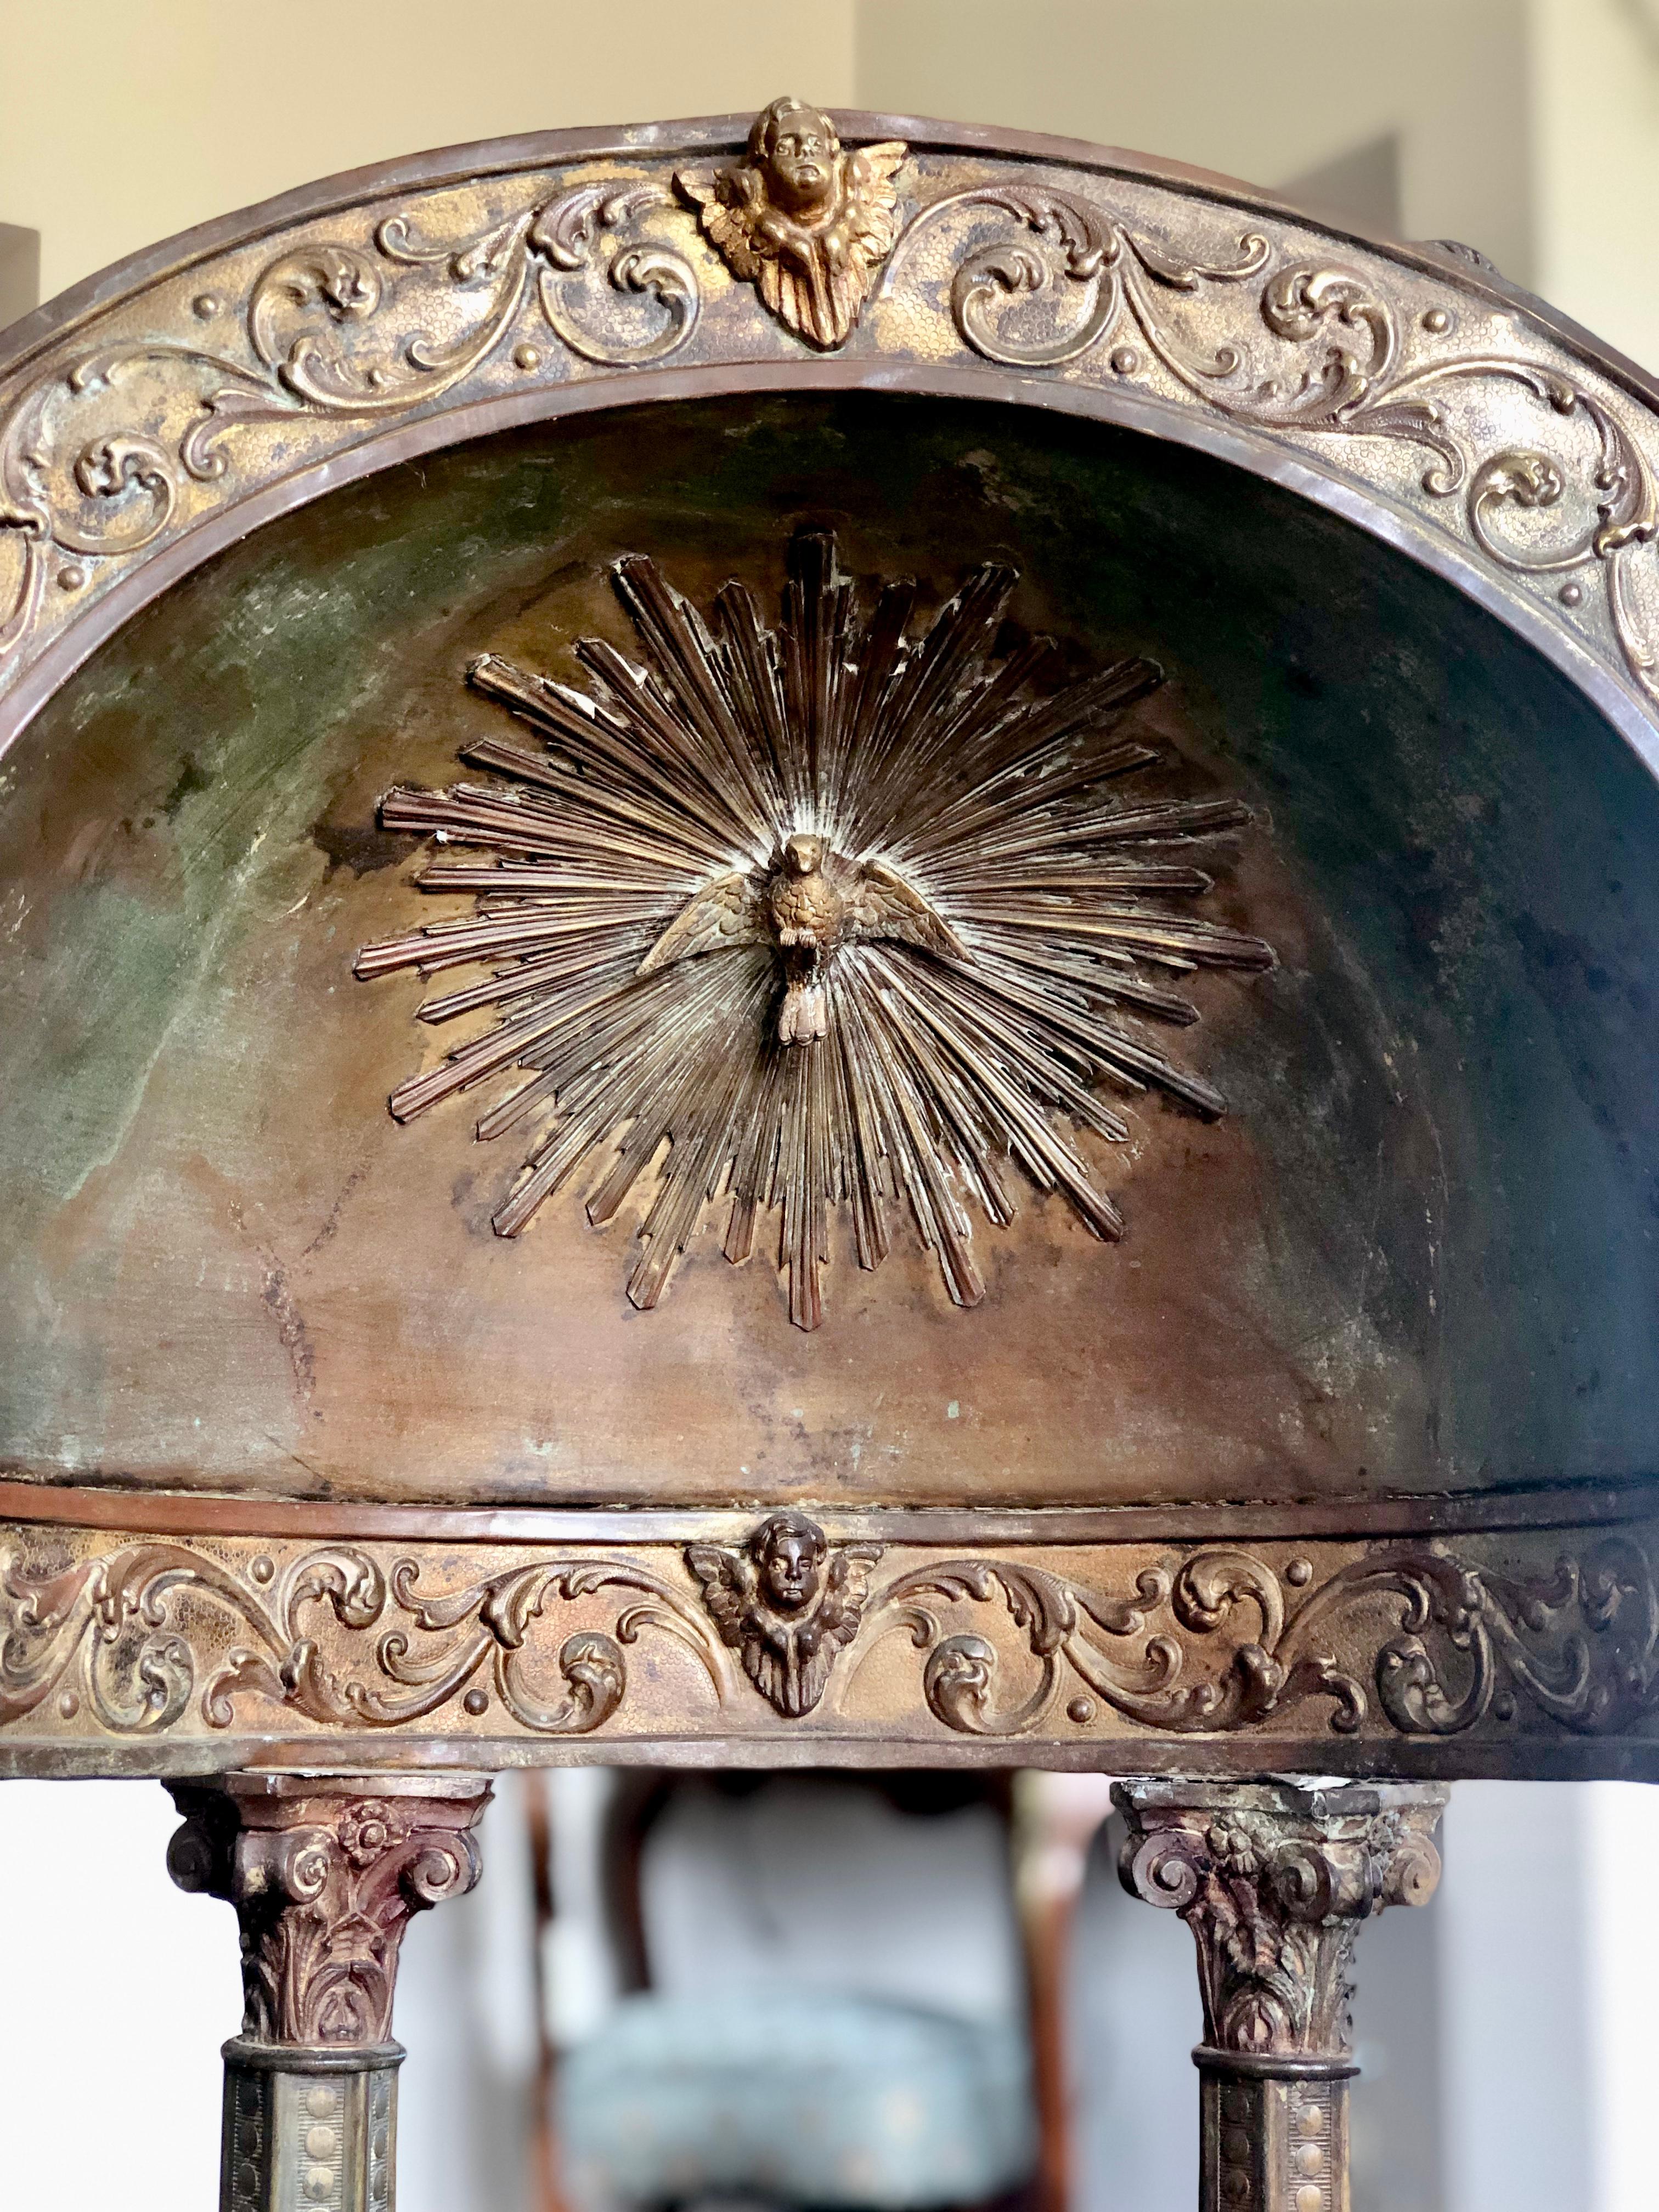 Beautiful authentic Italian metal and wood portable tabernacle in style of Antonio da Sangallo the Younger.
 
A civil and military architect, Antonio da Sangallo the Younger was trained in the famous Florentine workshop run by his uncles, Giuliano